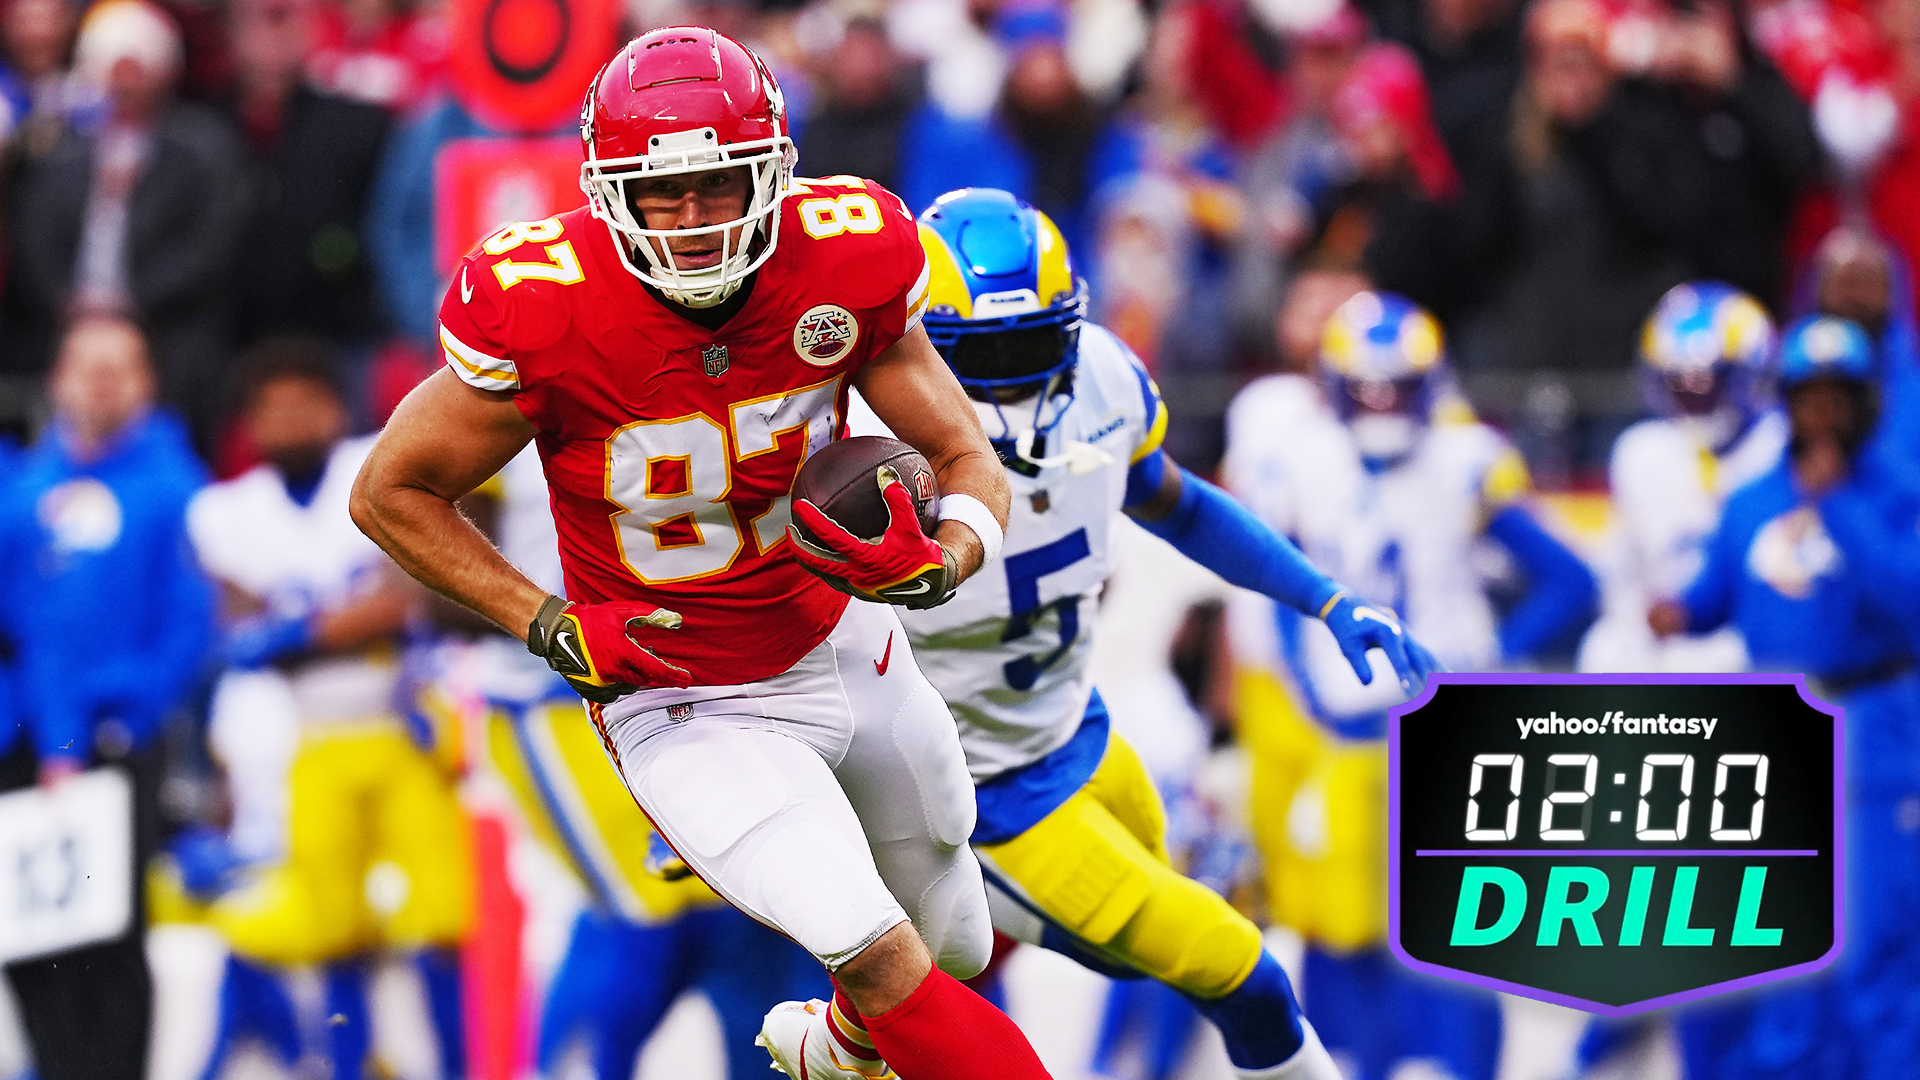 The Kelce crisis in fantasy football